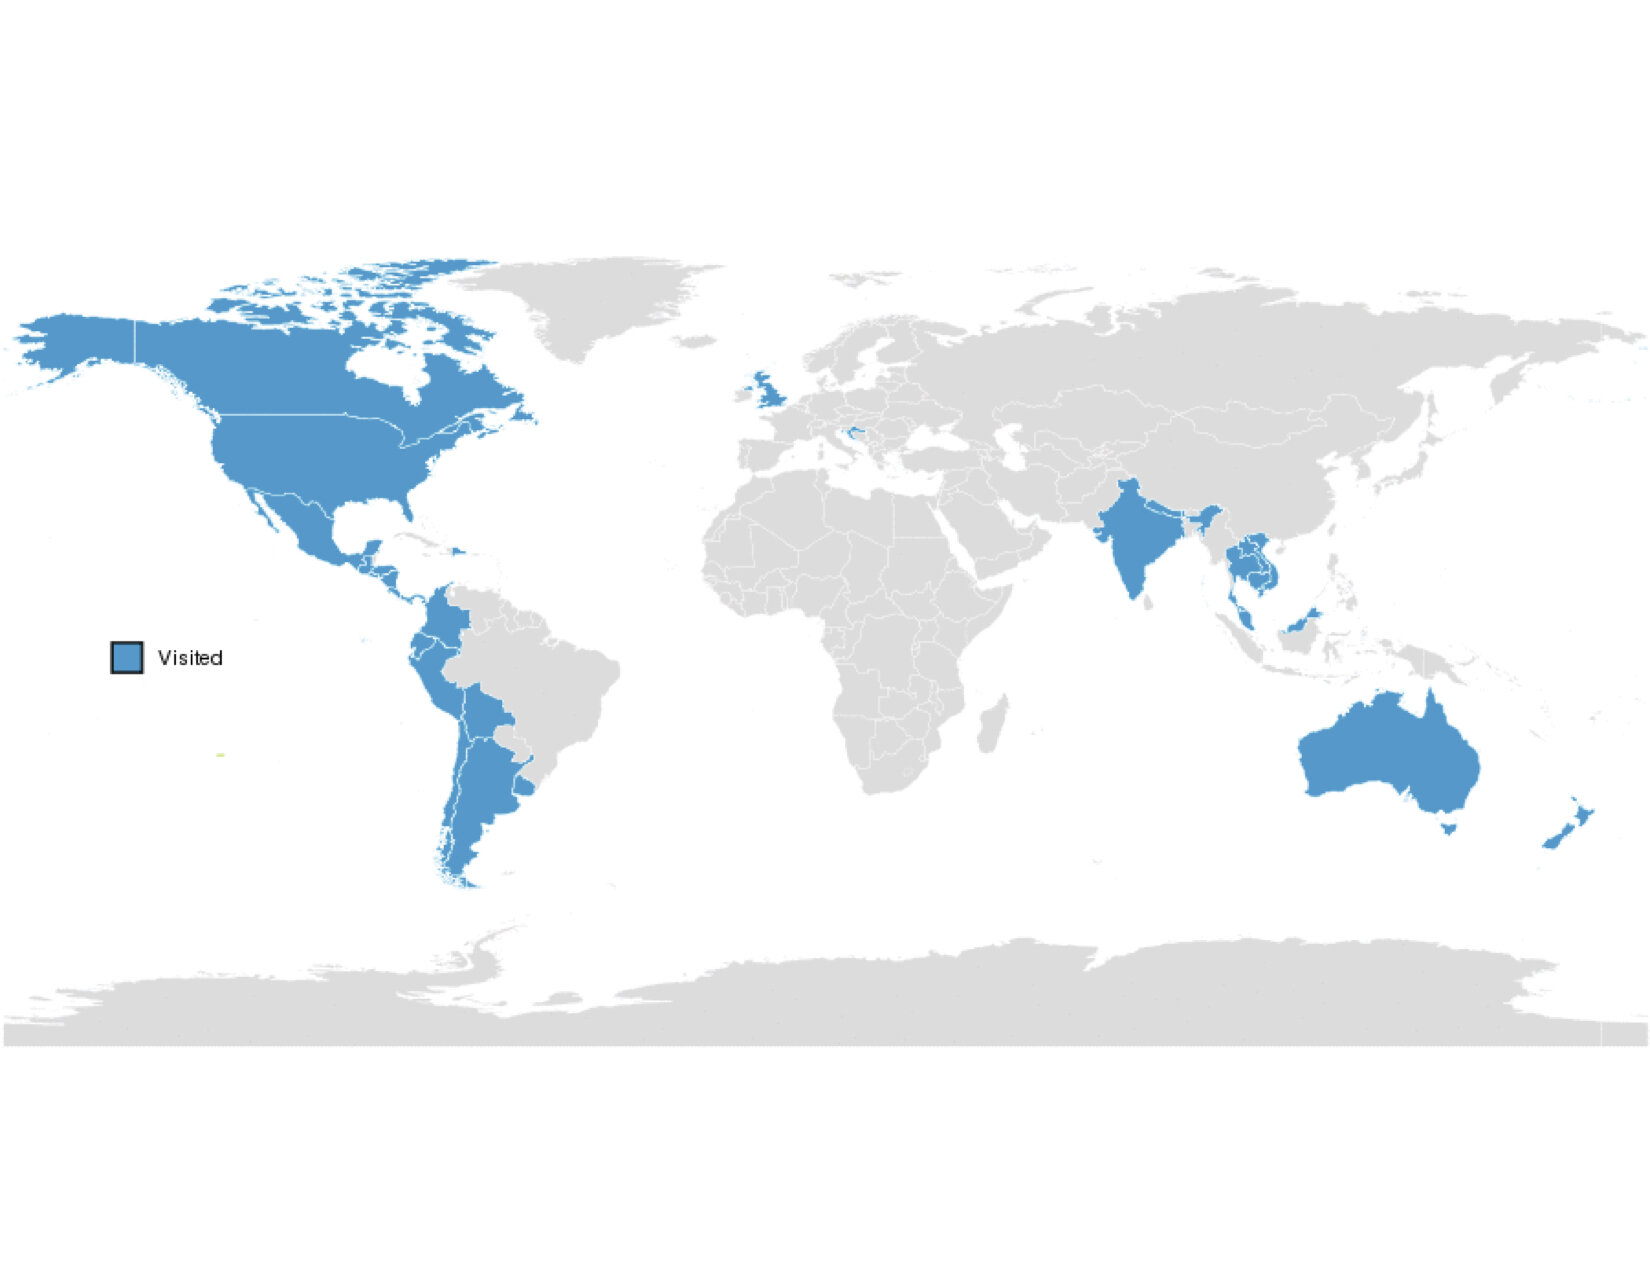 The Countries I Visited.jpg